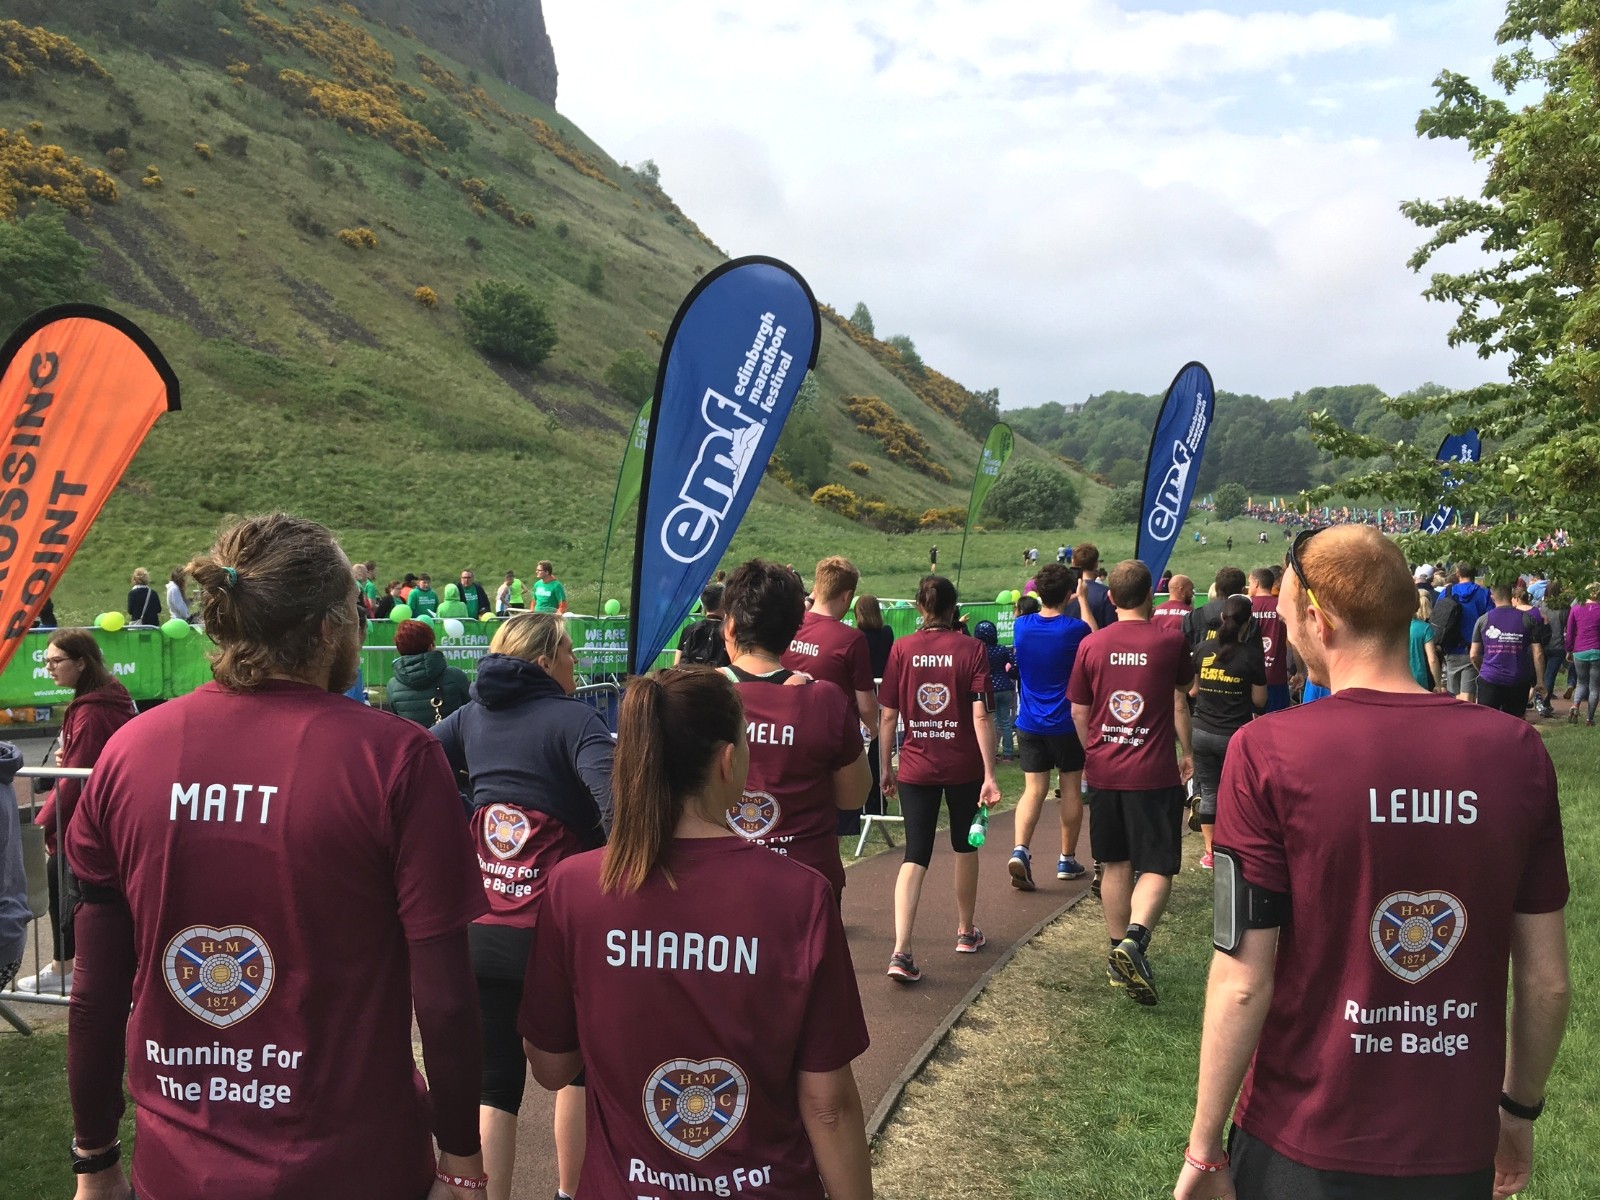  » New in 2019: more walking & running events to support Big Hearts!